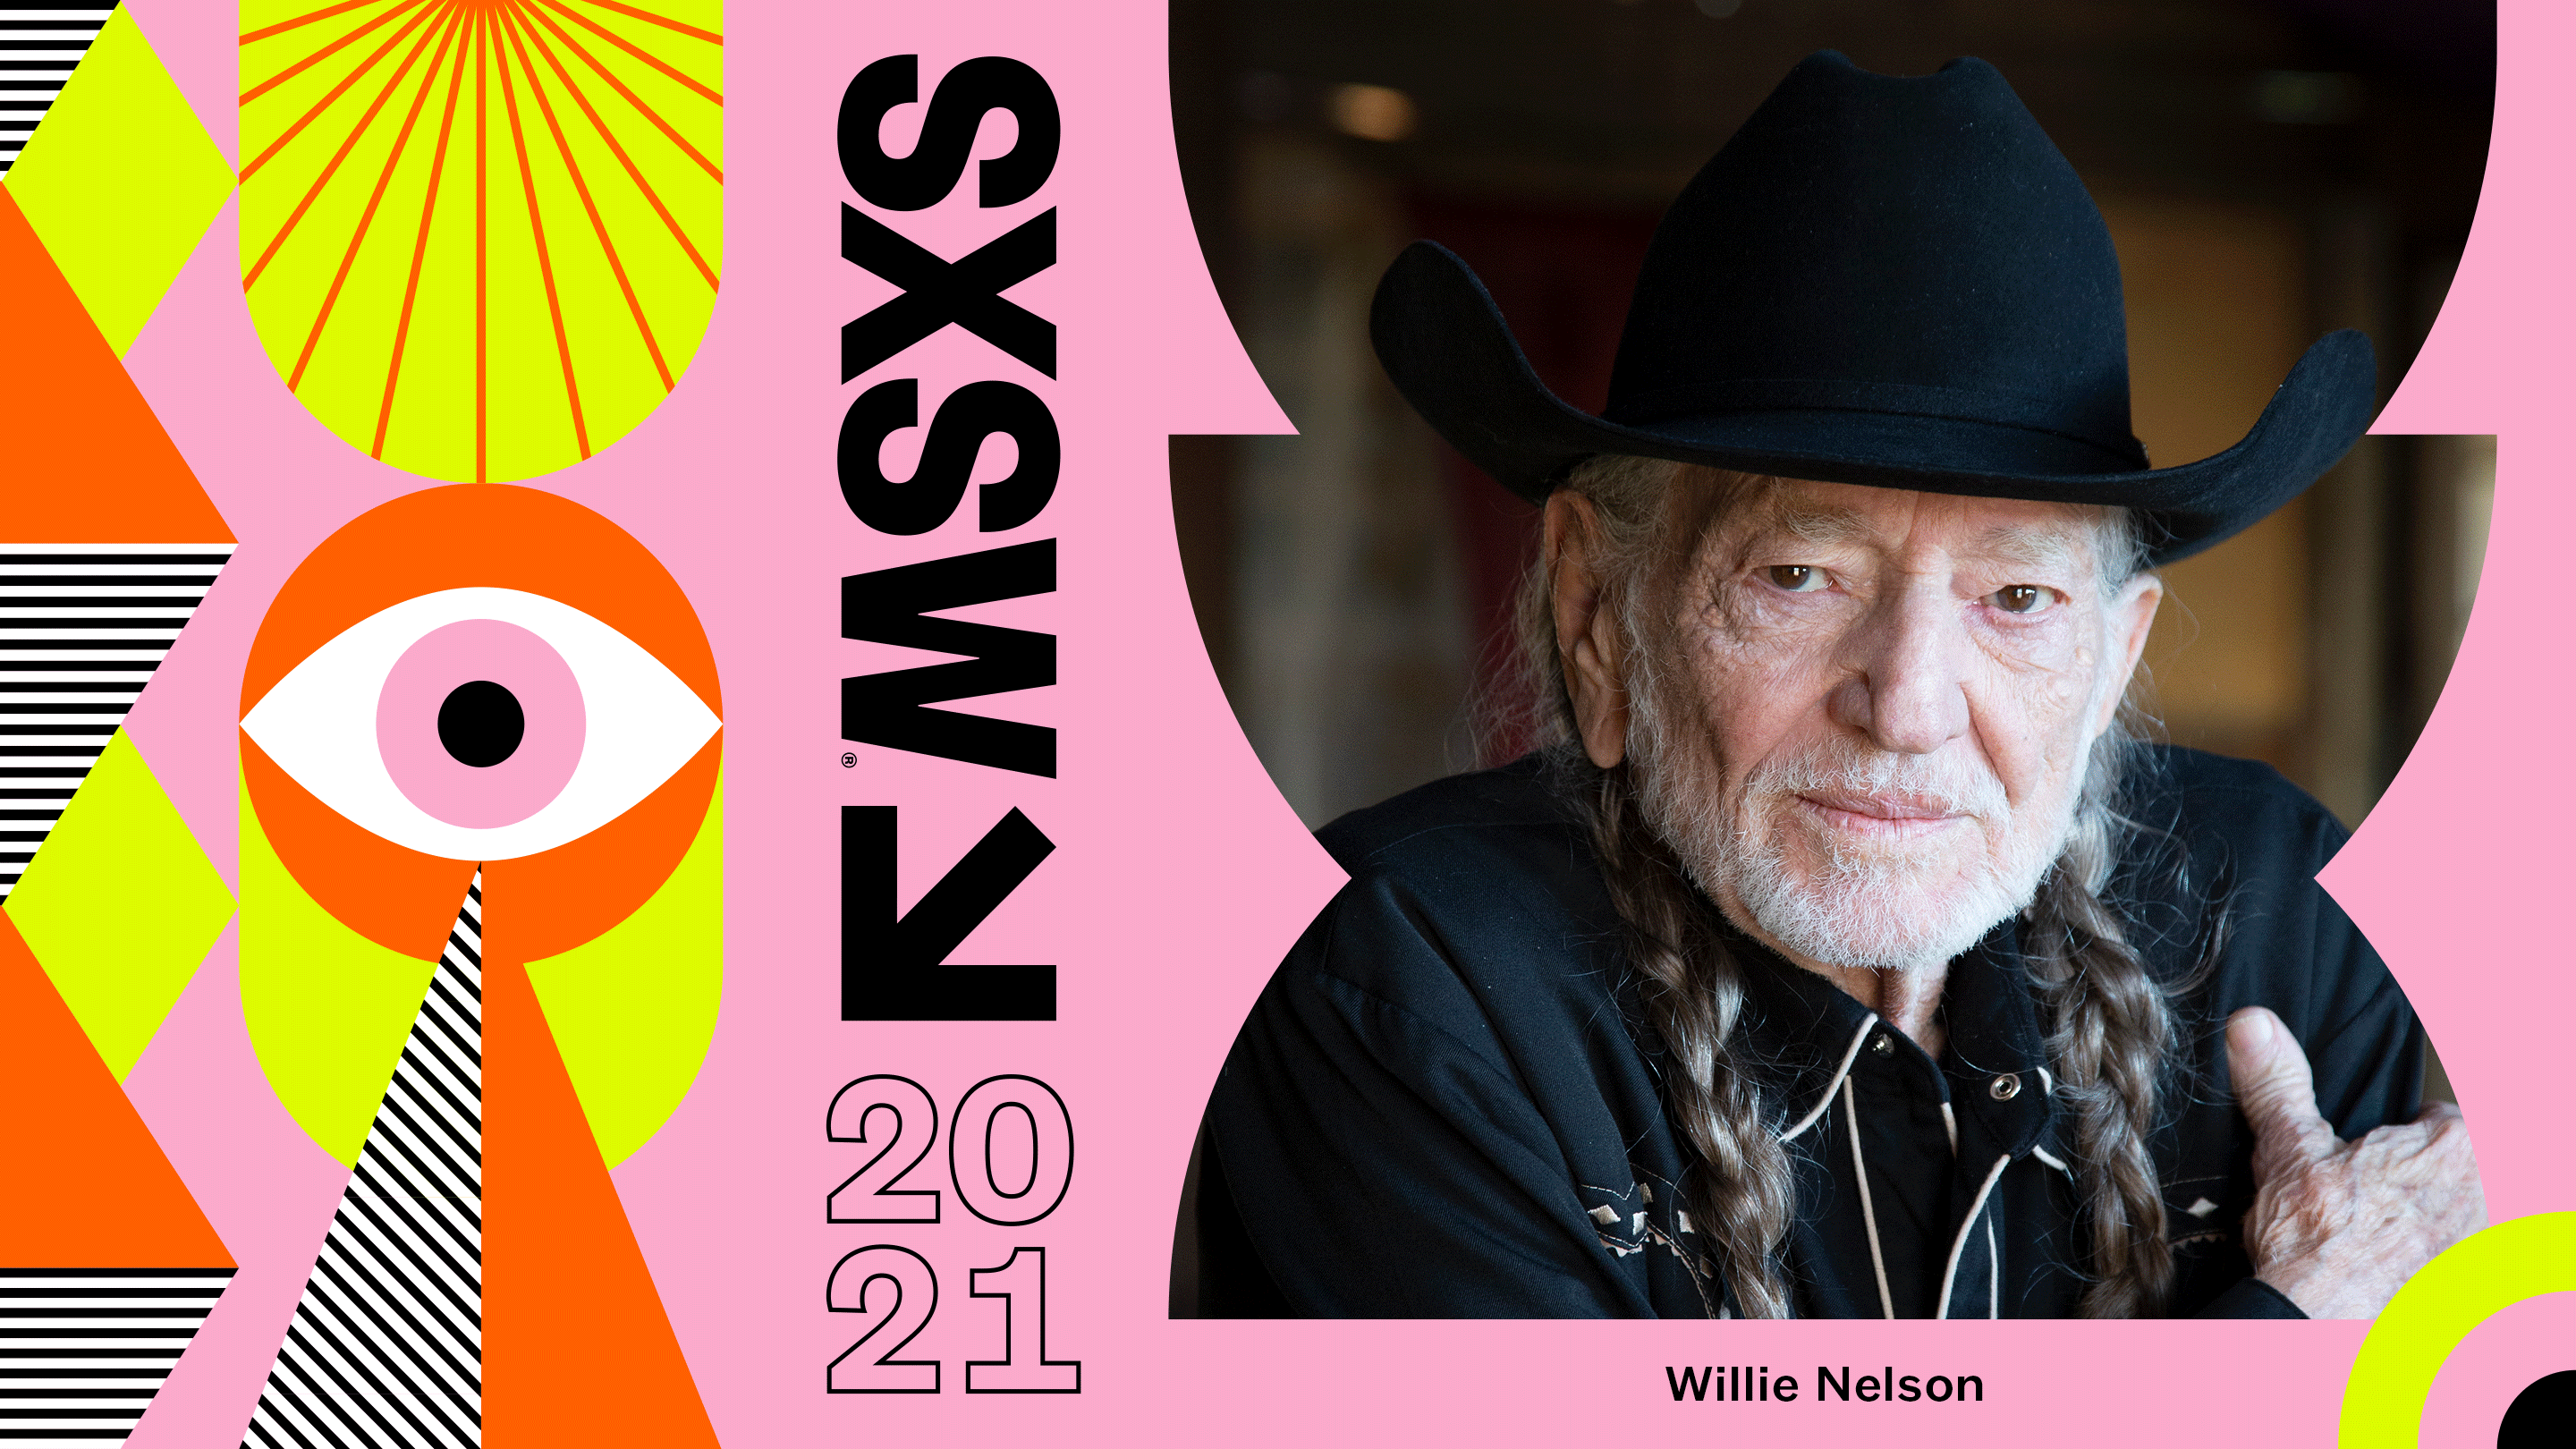 2021 SXSW Keynote Willie Nelson - Photo by Pamela Springsteen; and Featured Speakers The Chainsmokers – Alex Pall and Drew Taggart; and Queen Latifah - Photo by Sophy Holland (CBS)